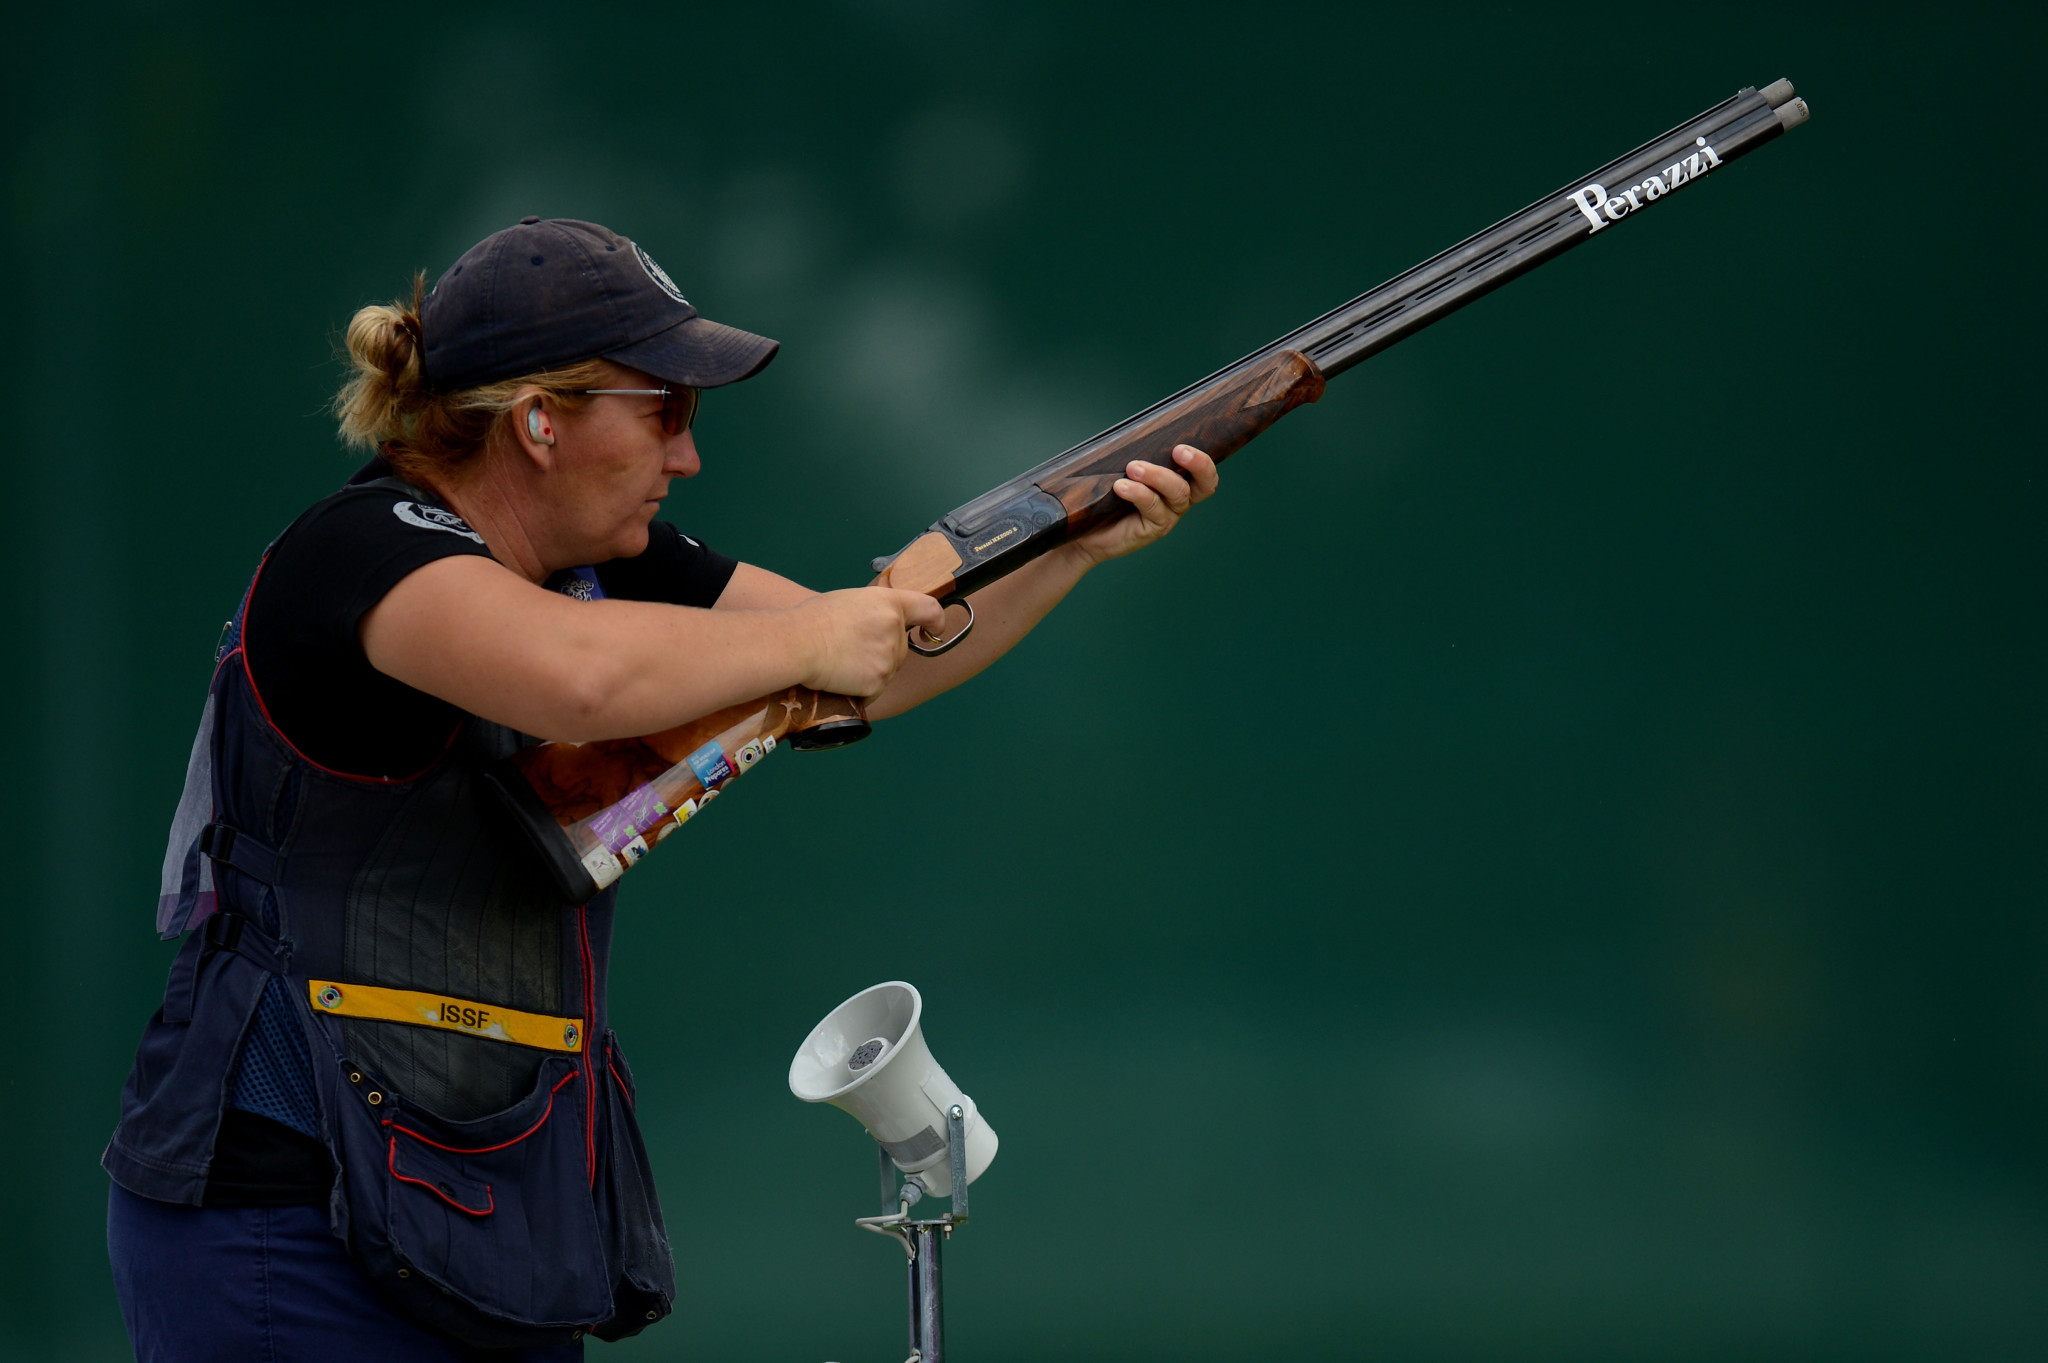 Kimberly Rhode leads the women's event after a perfect score ©ISSF 